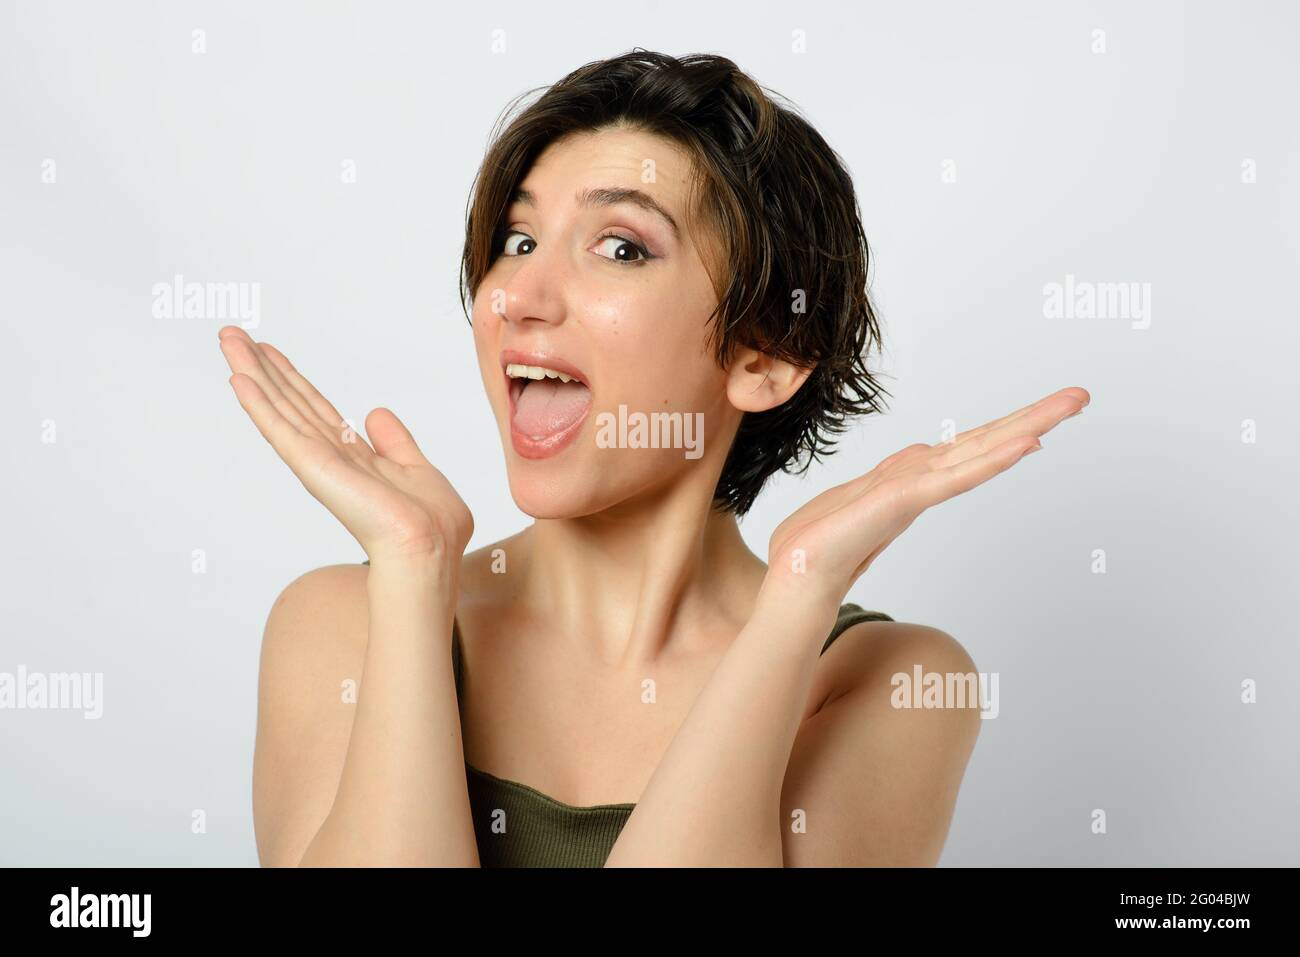 Portrait of a young woman with short and wet hair and a funny emotion on her face on a white background. Stock Photo